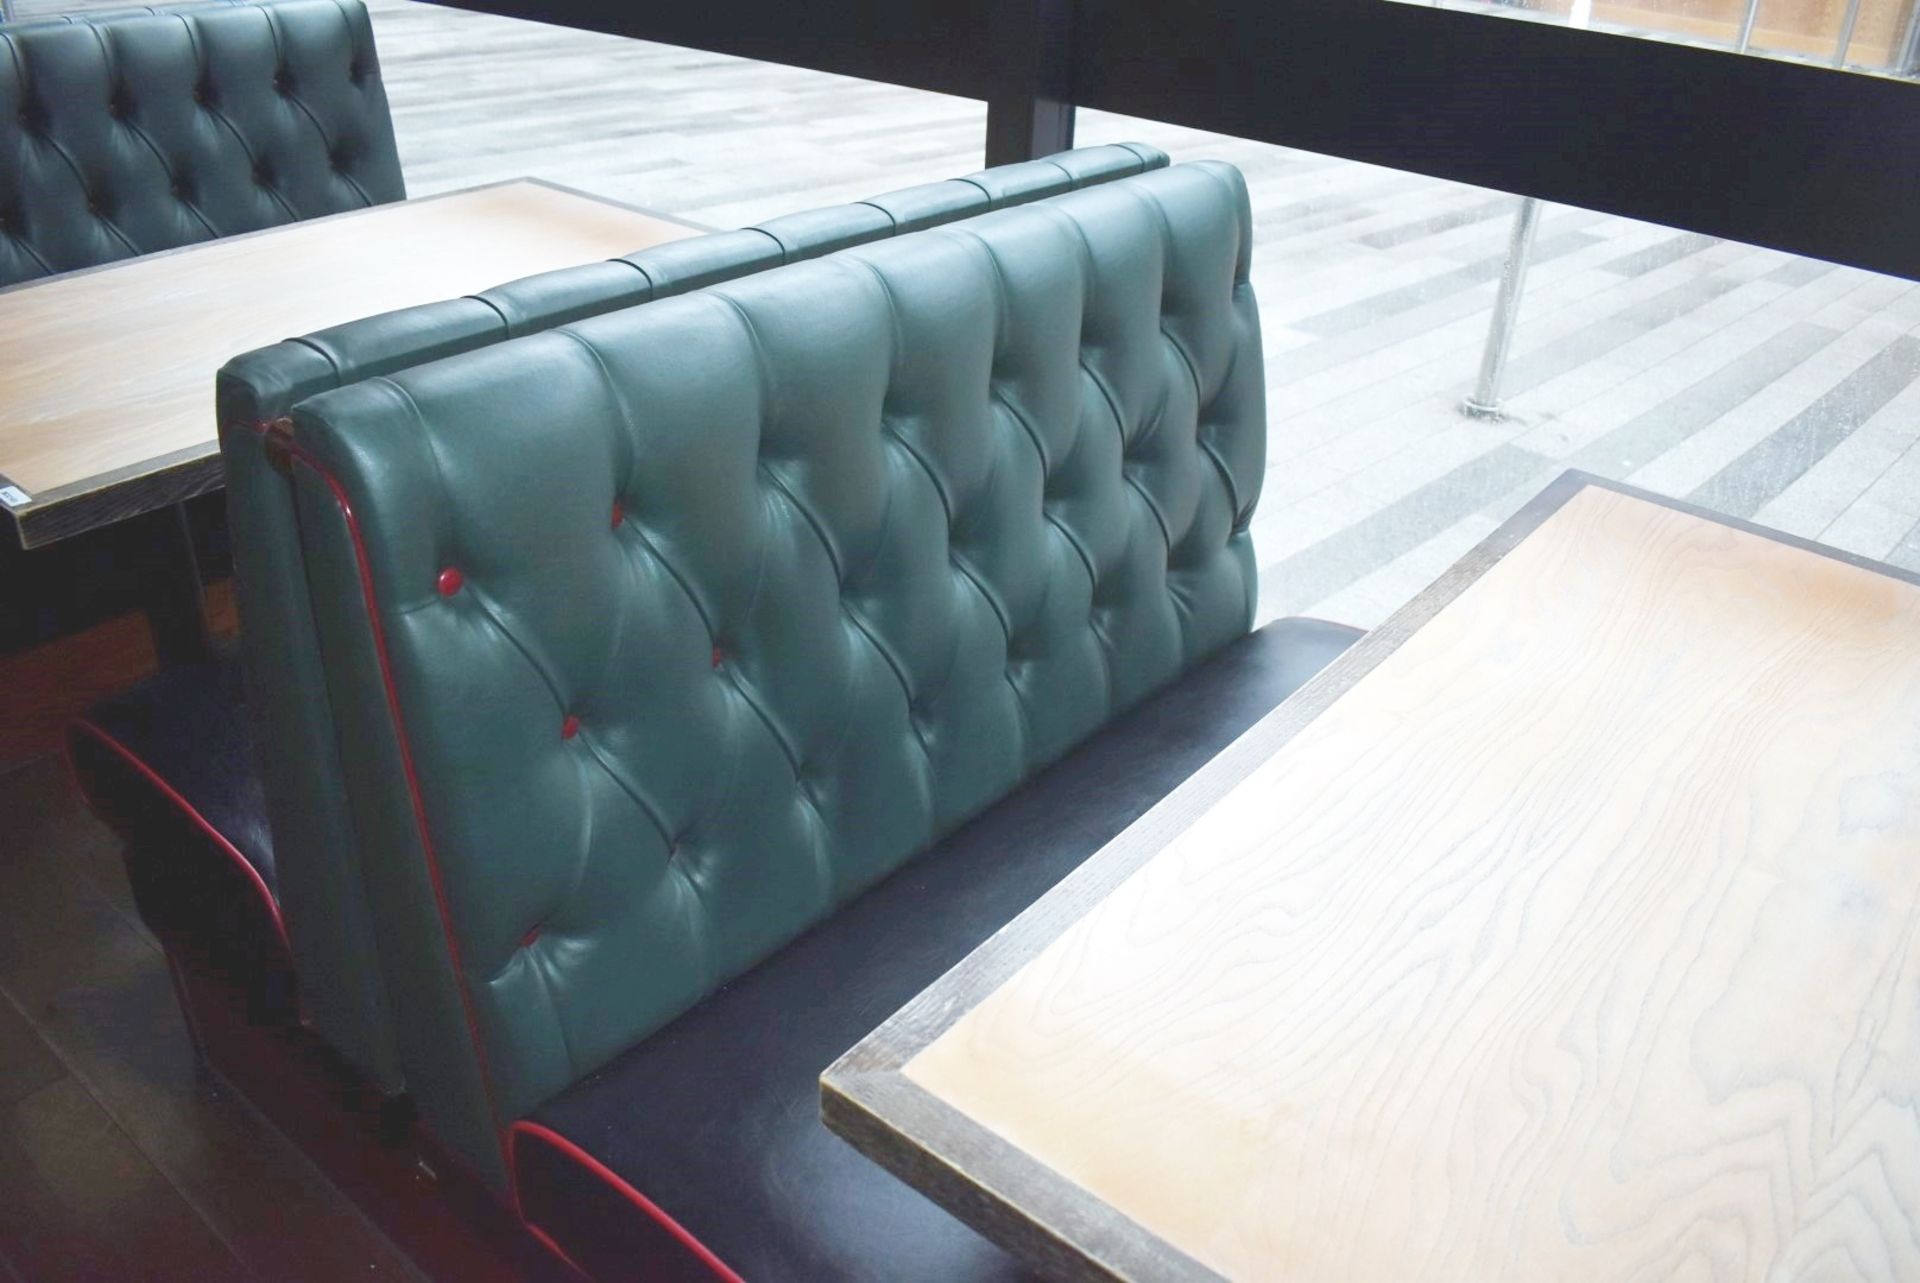 4 x Sections of Restaurant Double Booth Seating - Sits Up to 12 Persons - Green & Black Upholstery - Image 11 of 24